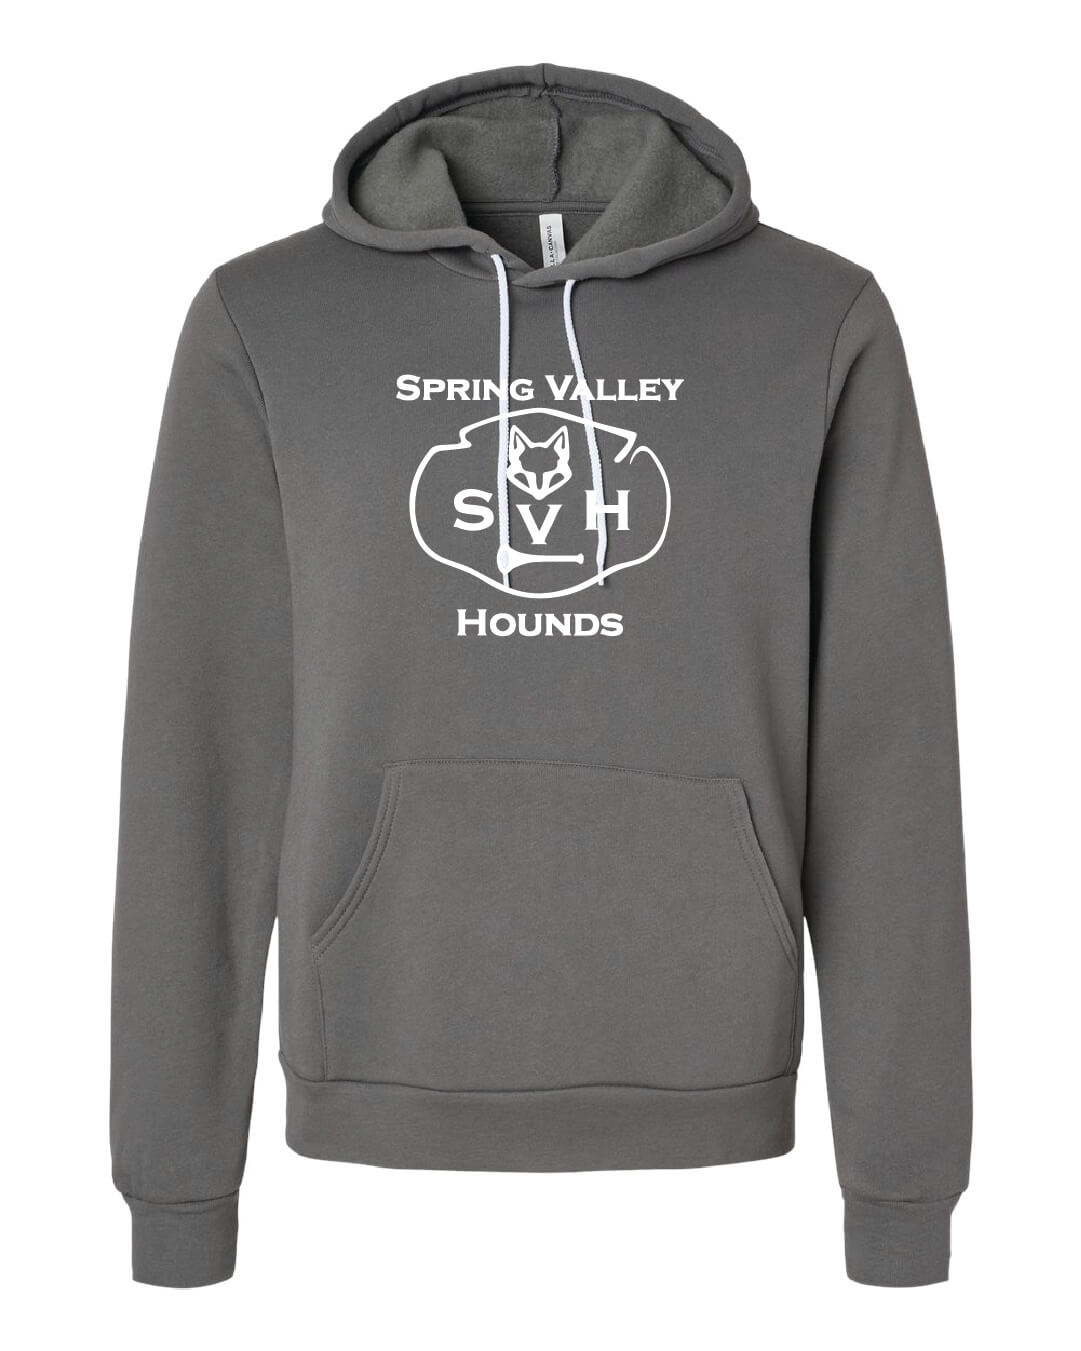 Spring Valley Hounds Hoodie (Bella Canvas, Adult) gray